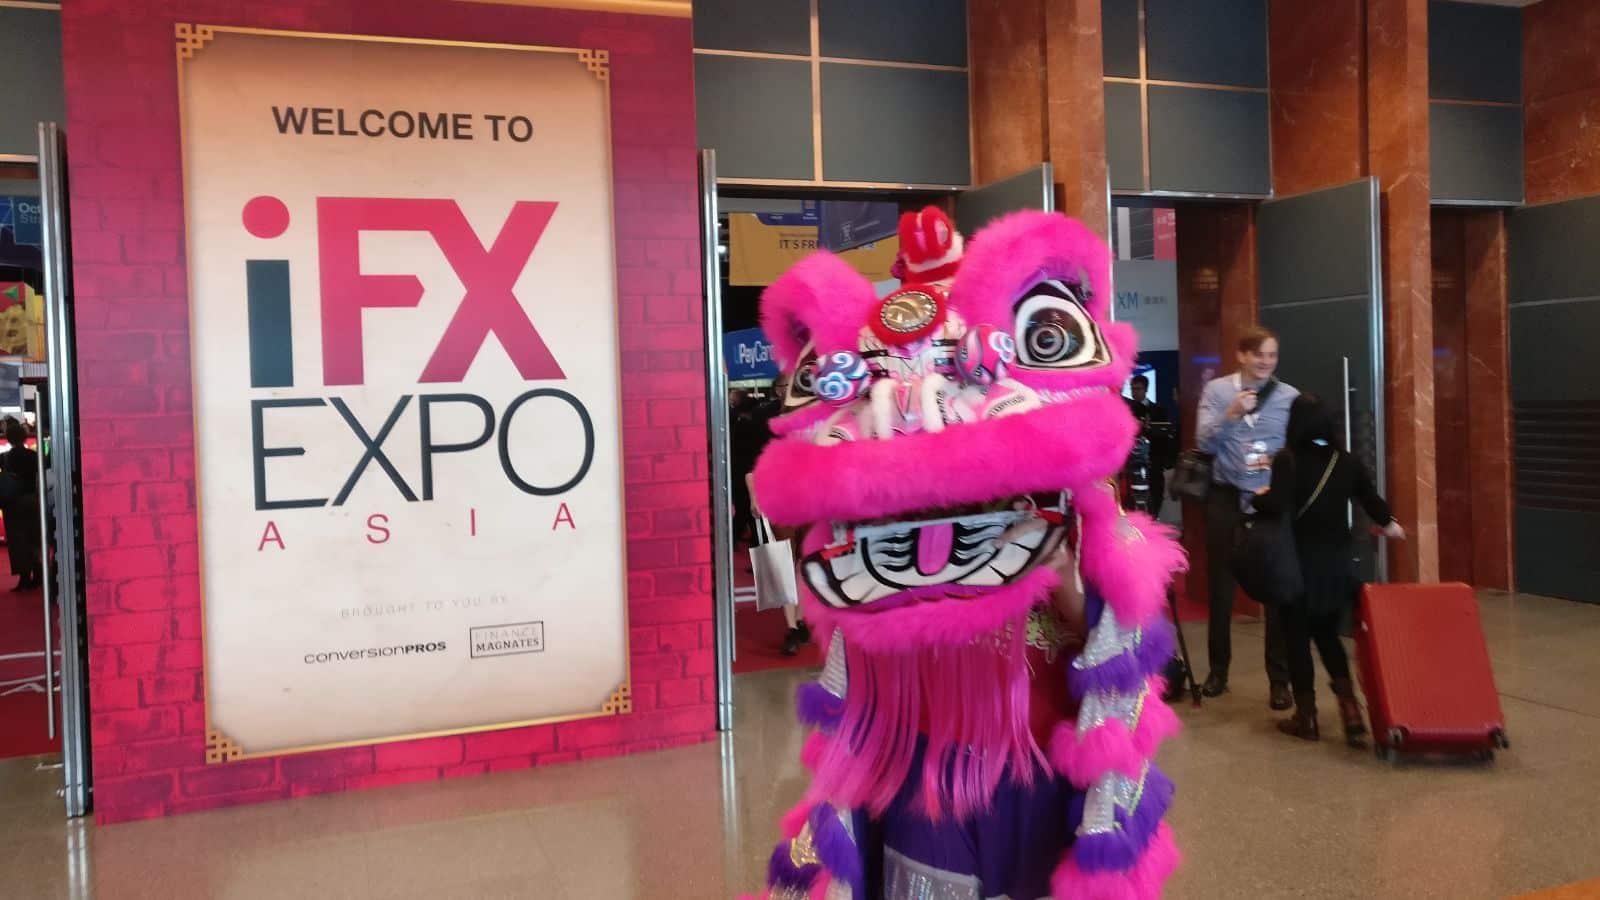 Finance Magnates Live Updates from #iFXEXPO Asia 2018